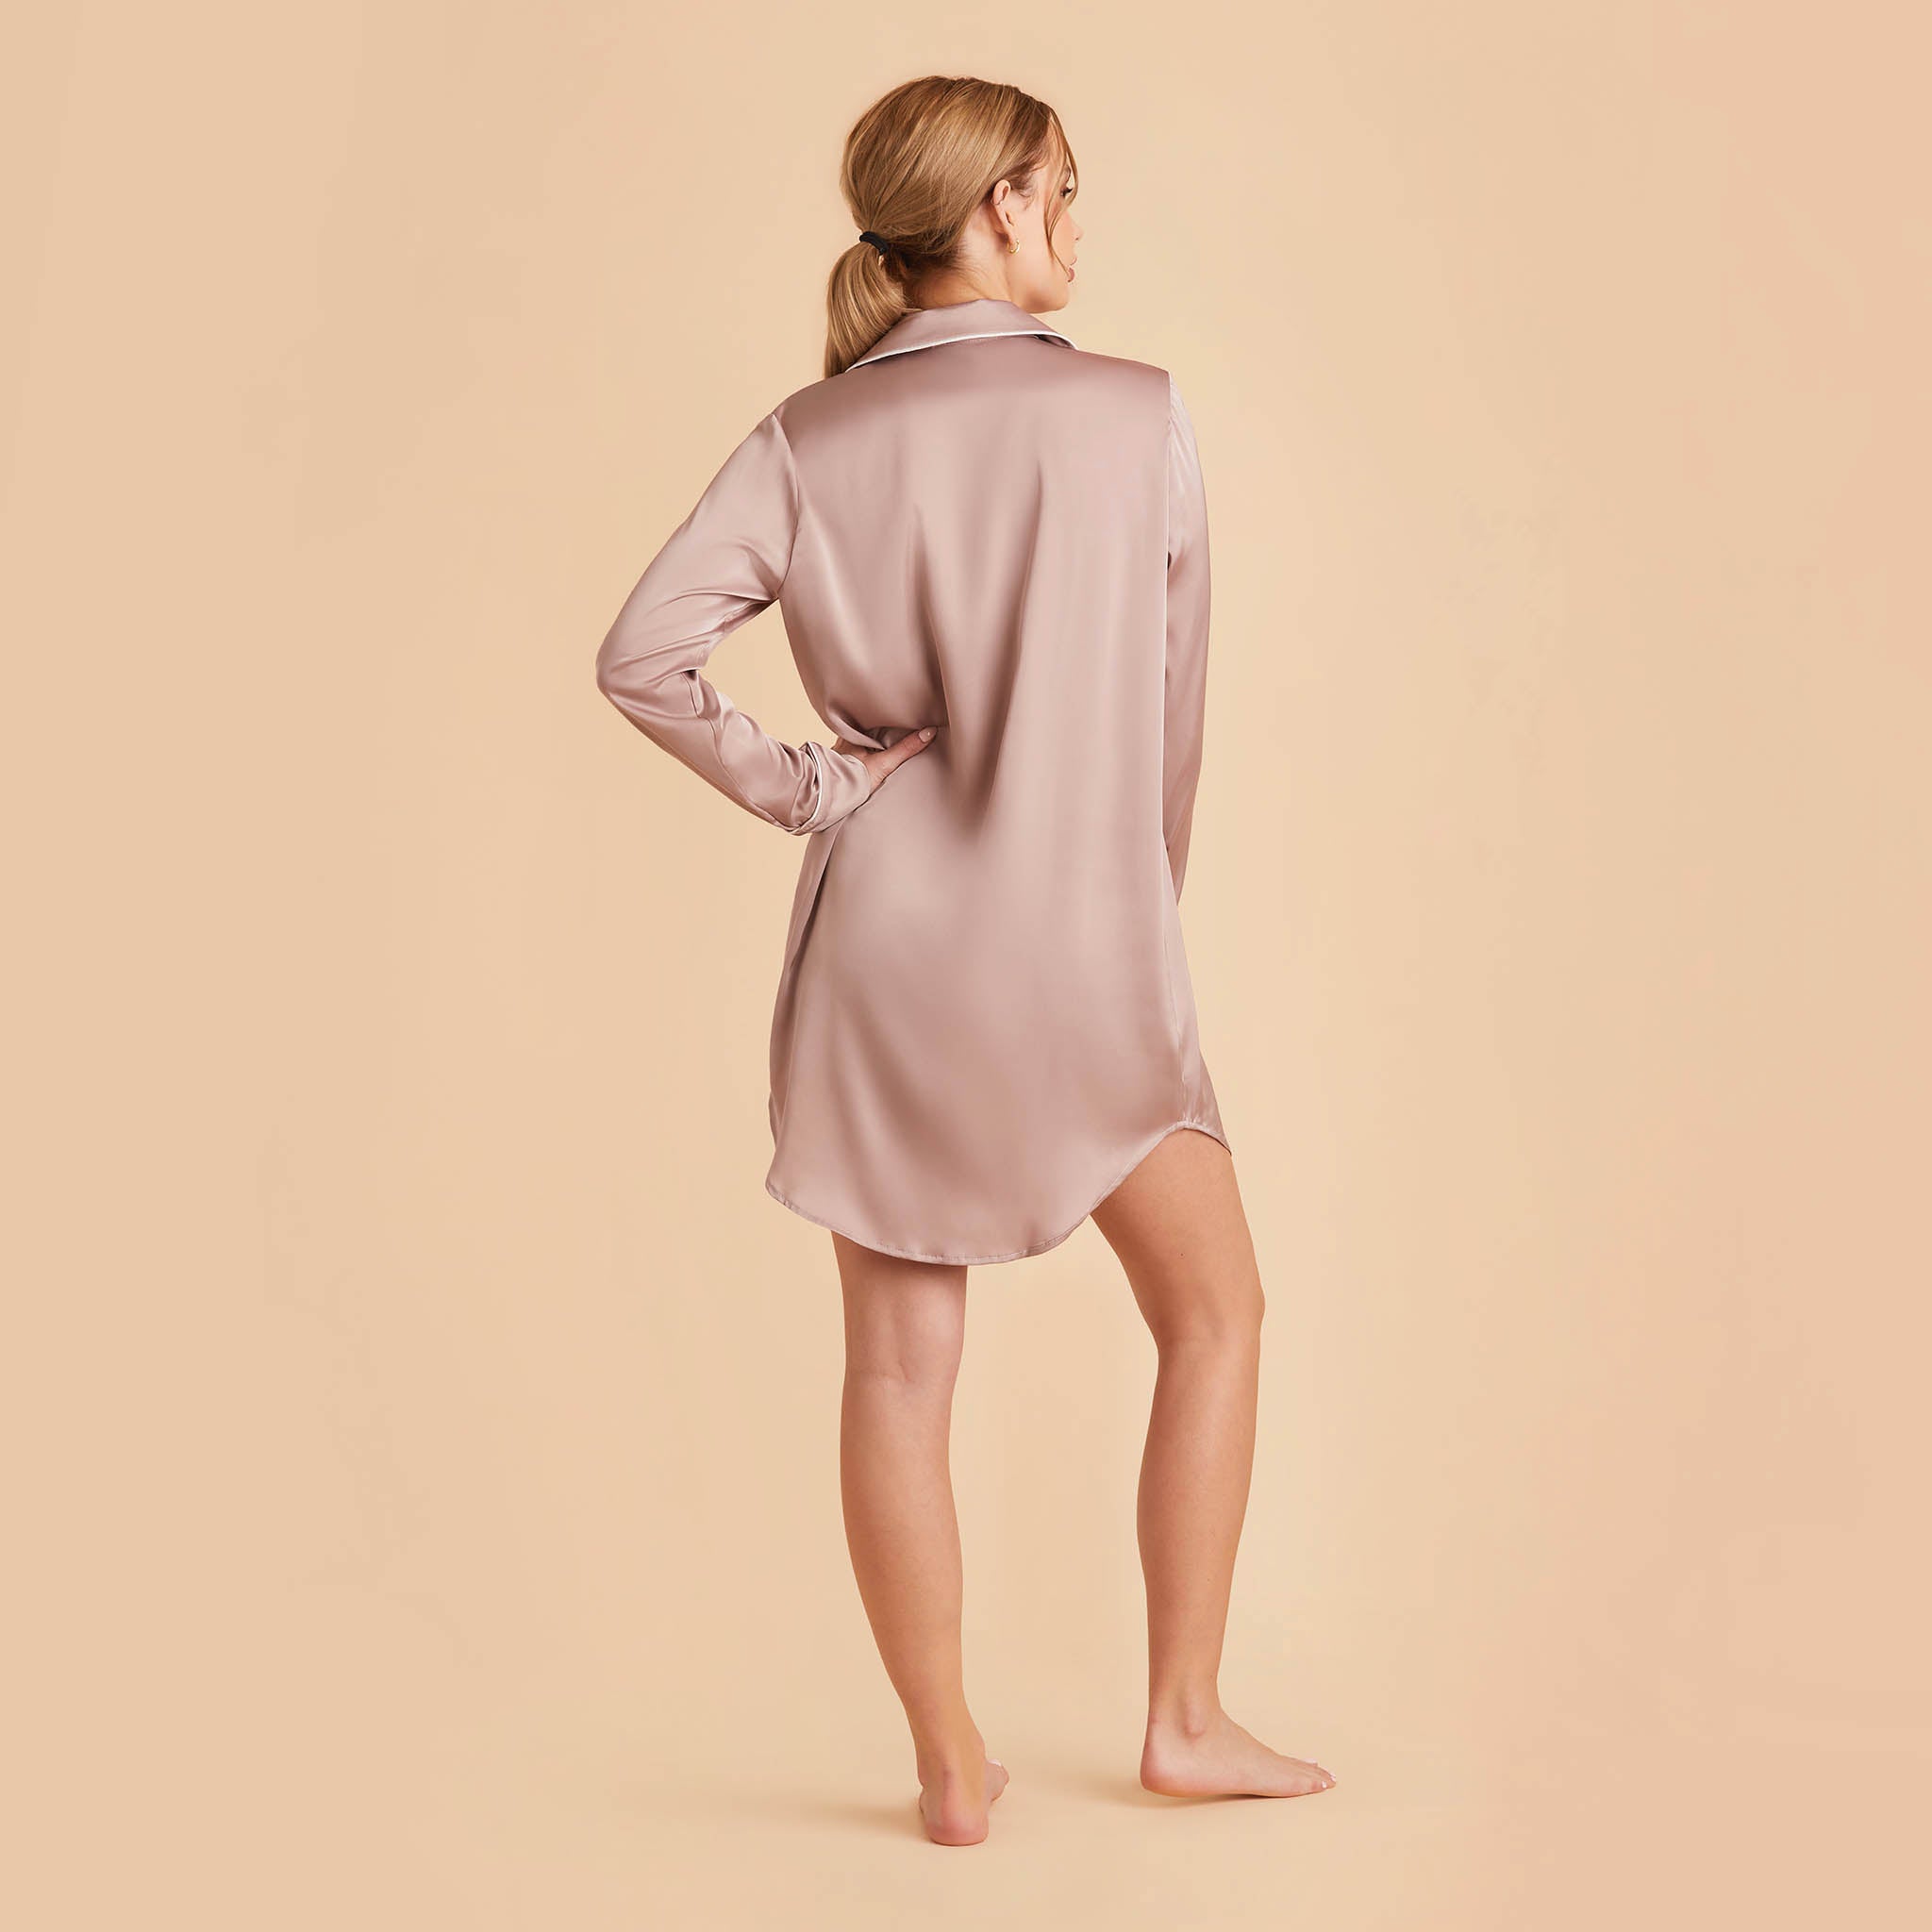 Satin Sleepshirt in mauve taupe by Birdy Grey, back view